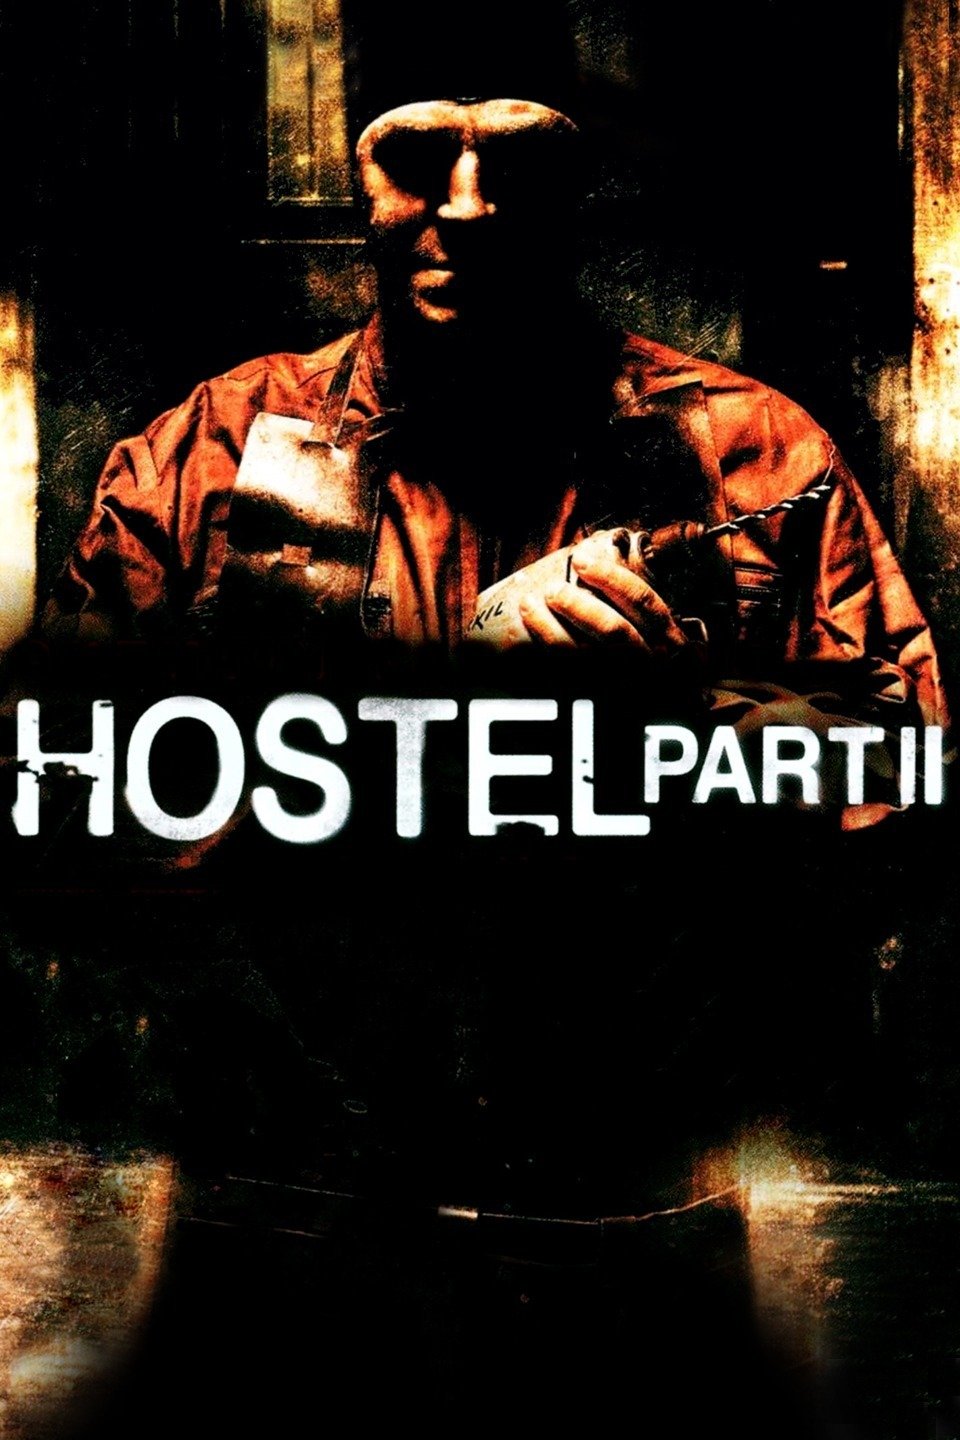 is hostel the movie based on a true story